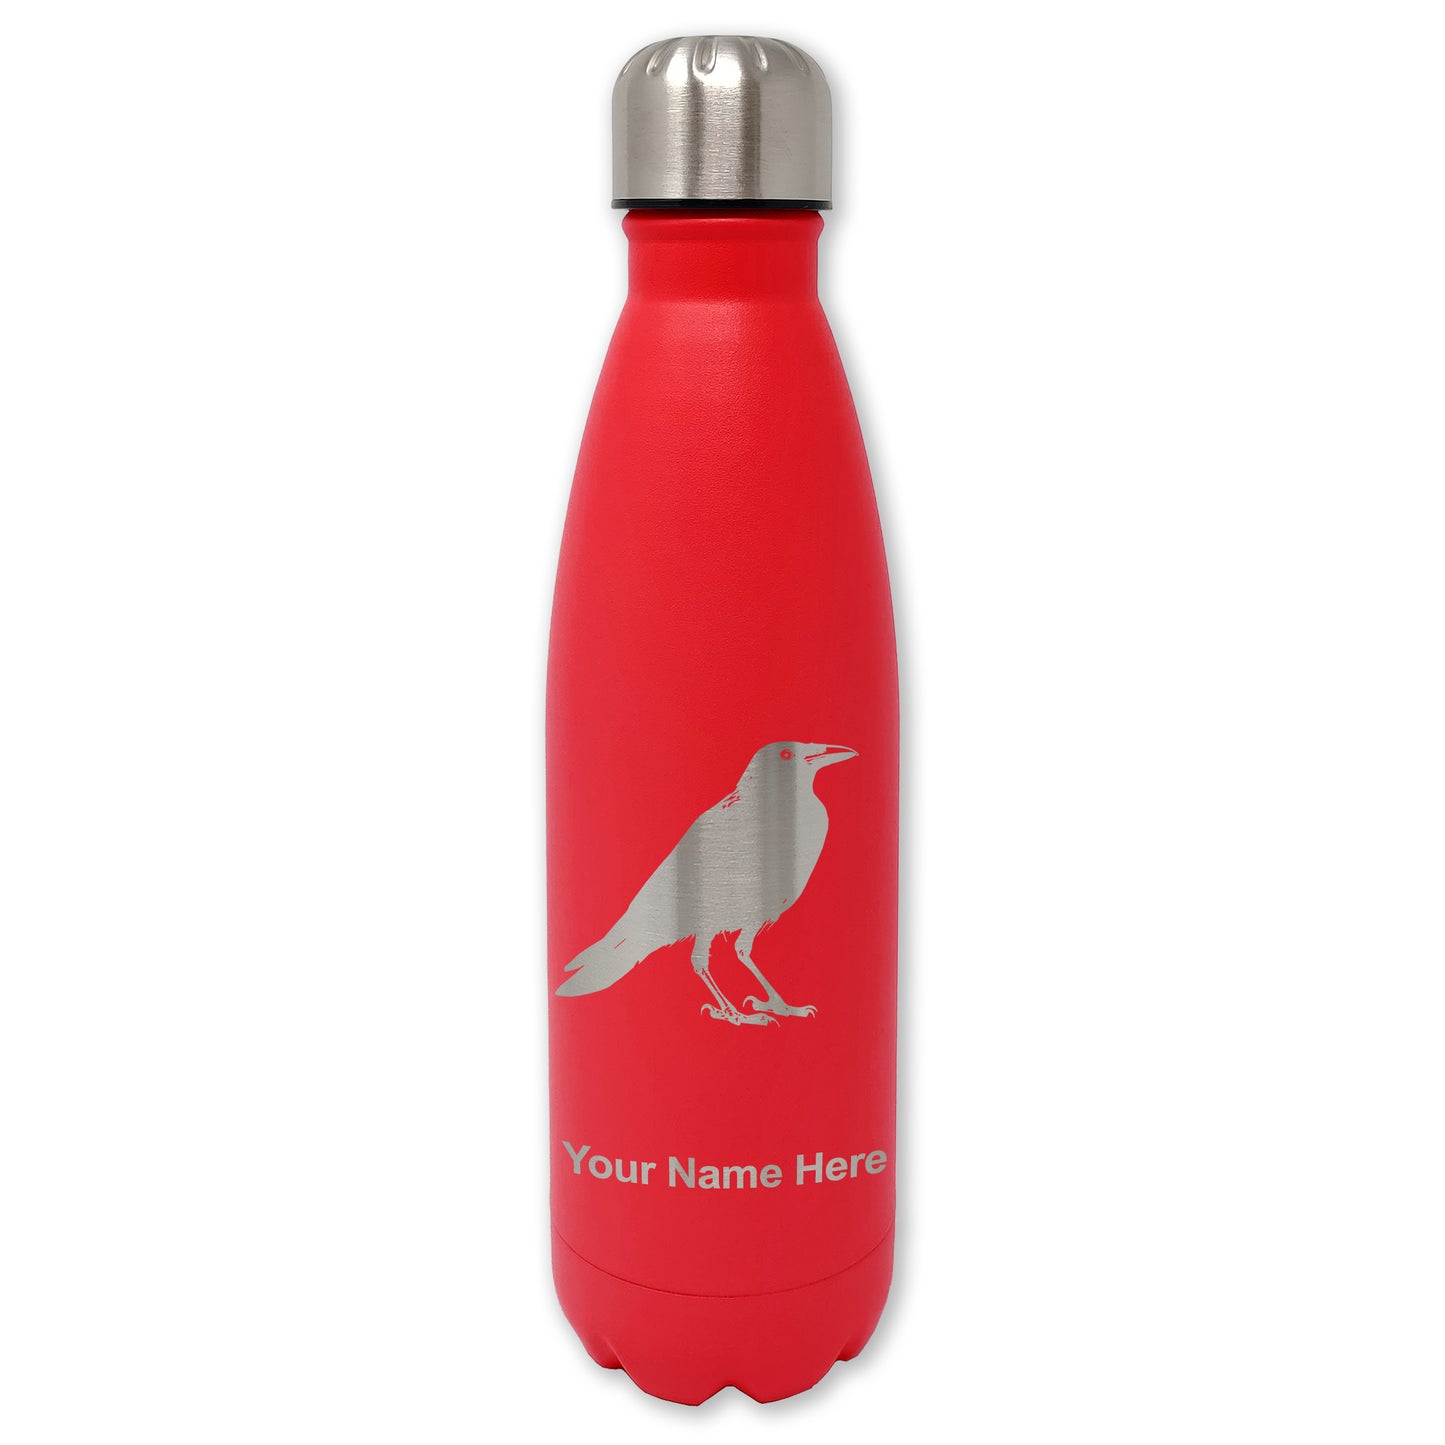 LaserGram Double Wall Water Bottle, Crow, Personalized Engraving Included